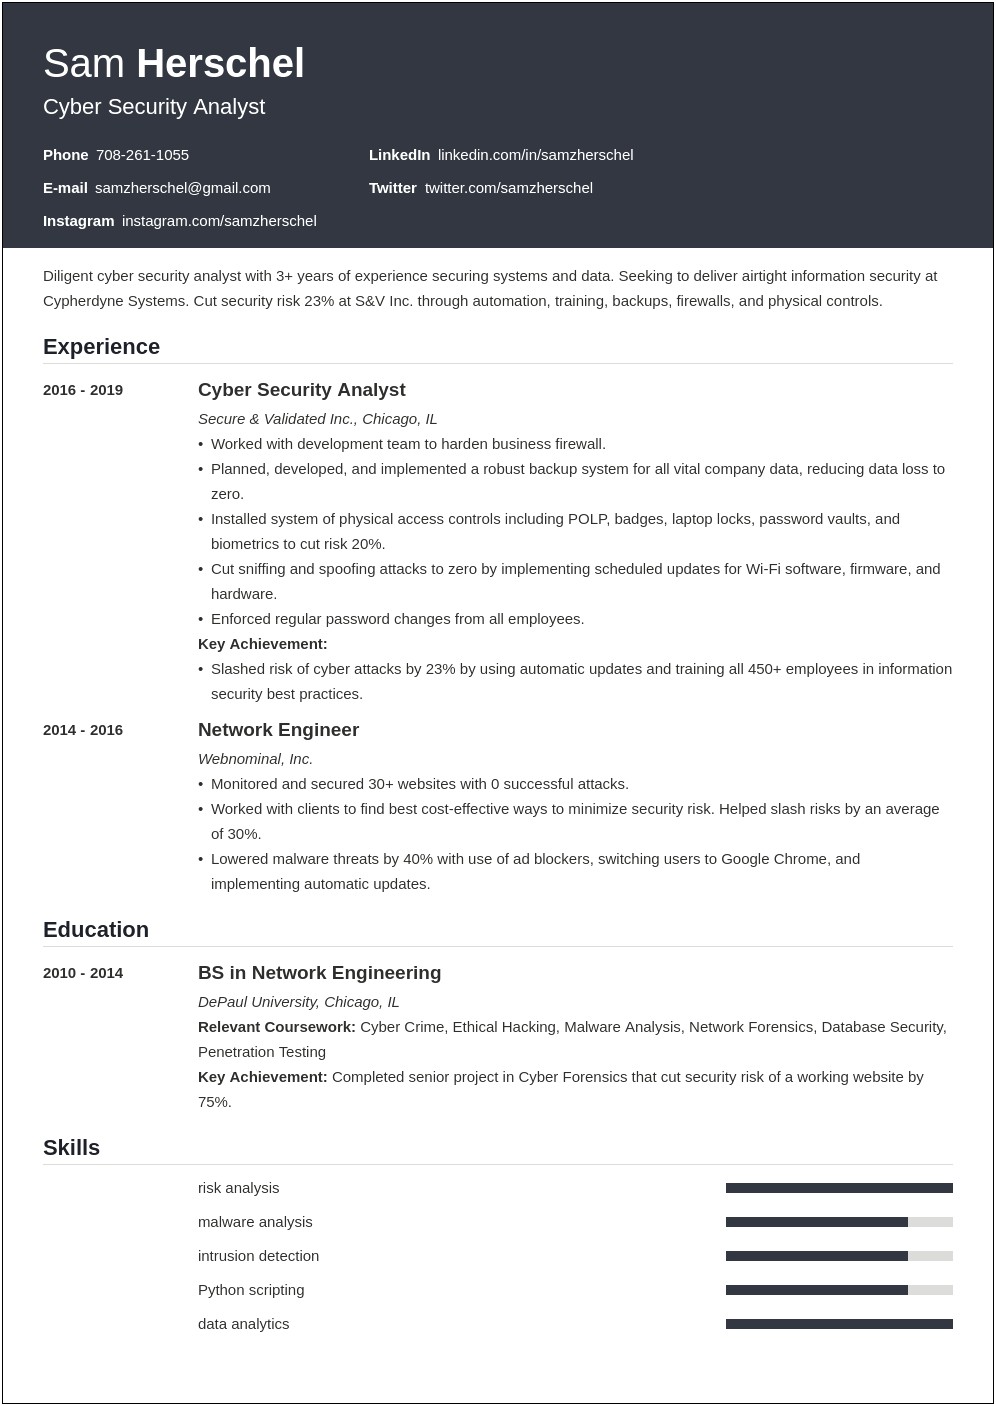 Career Objective For Resume For Cyber Security